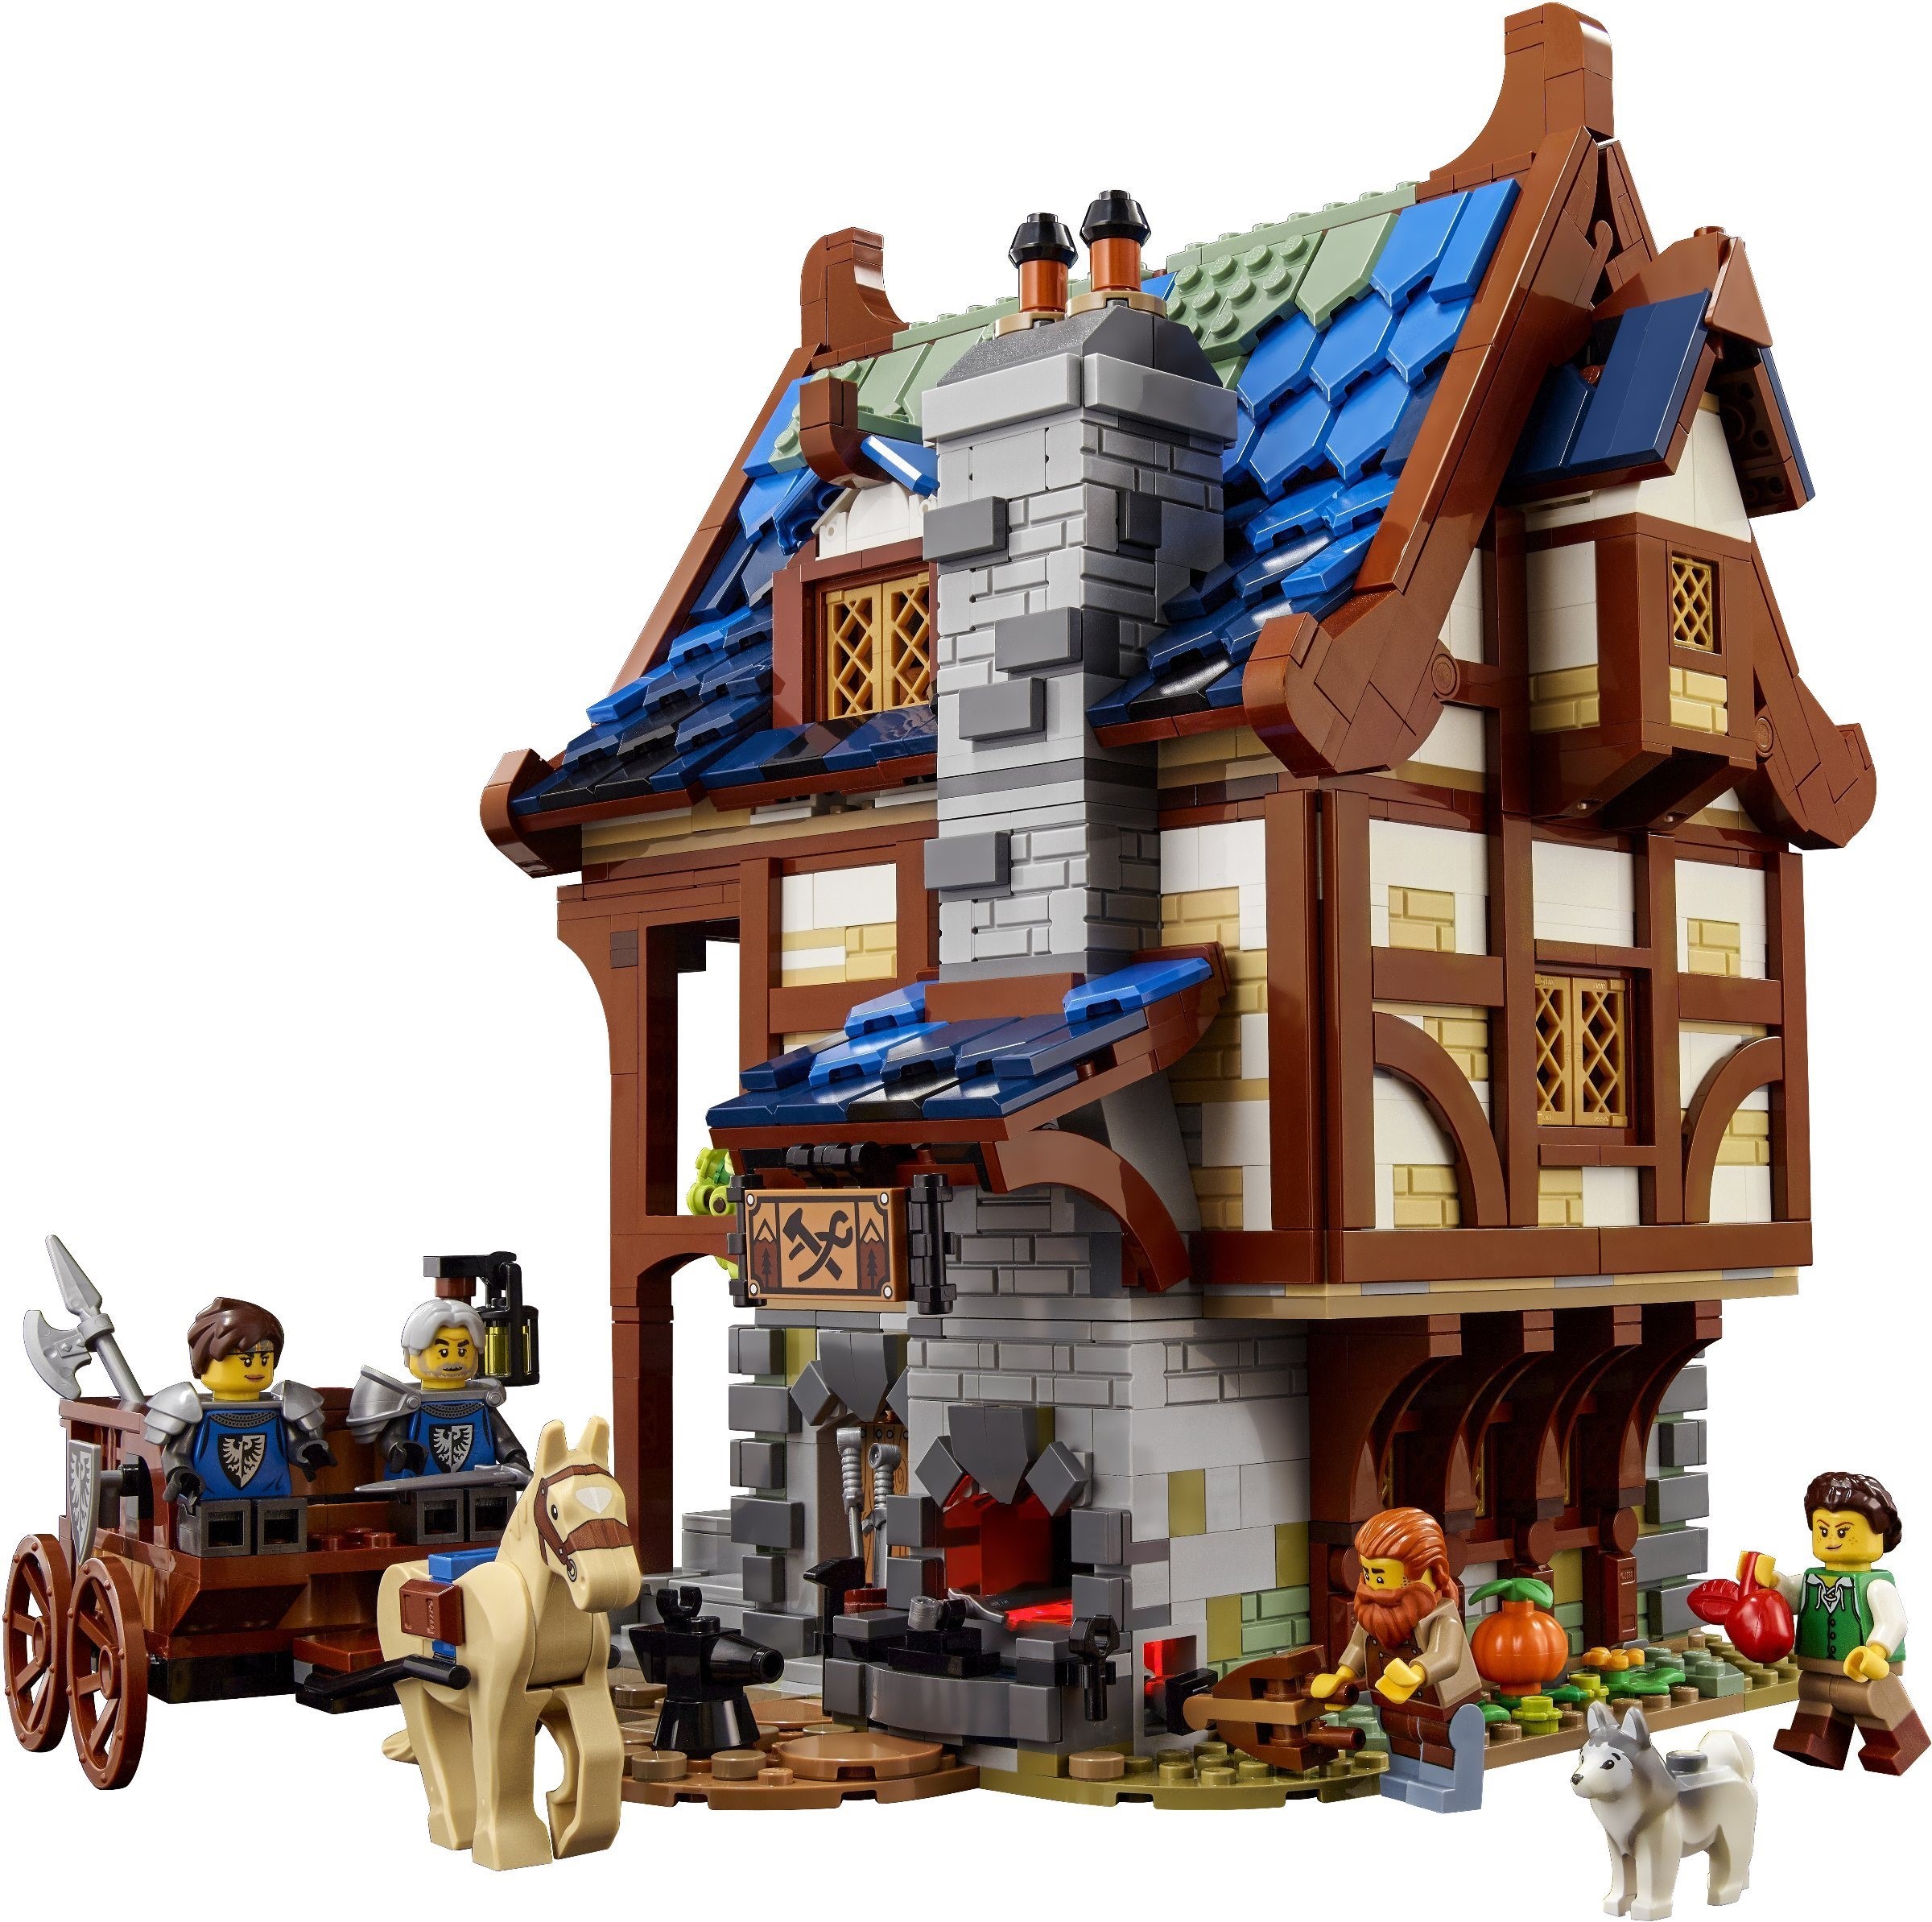 LEGO How can use LEGO for Dungeons